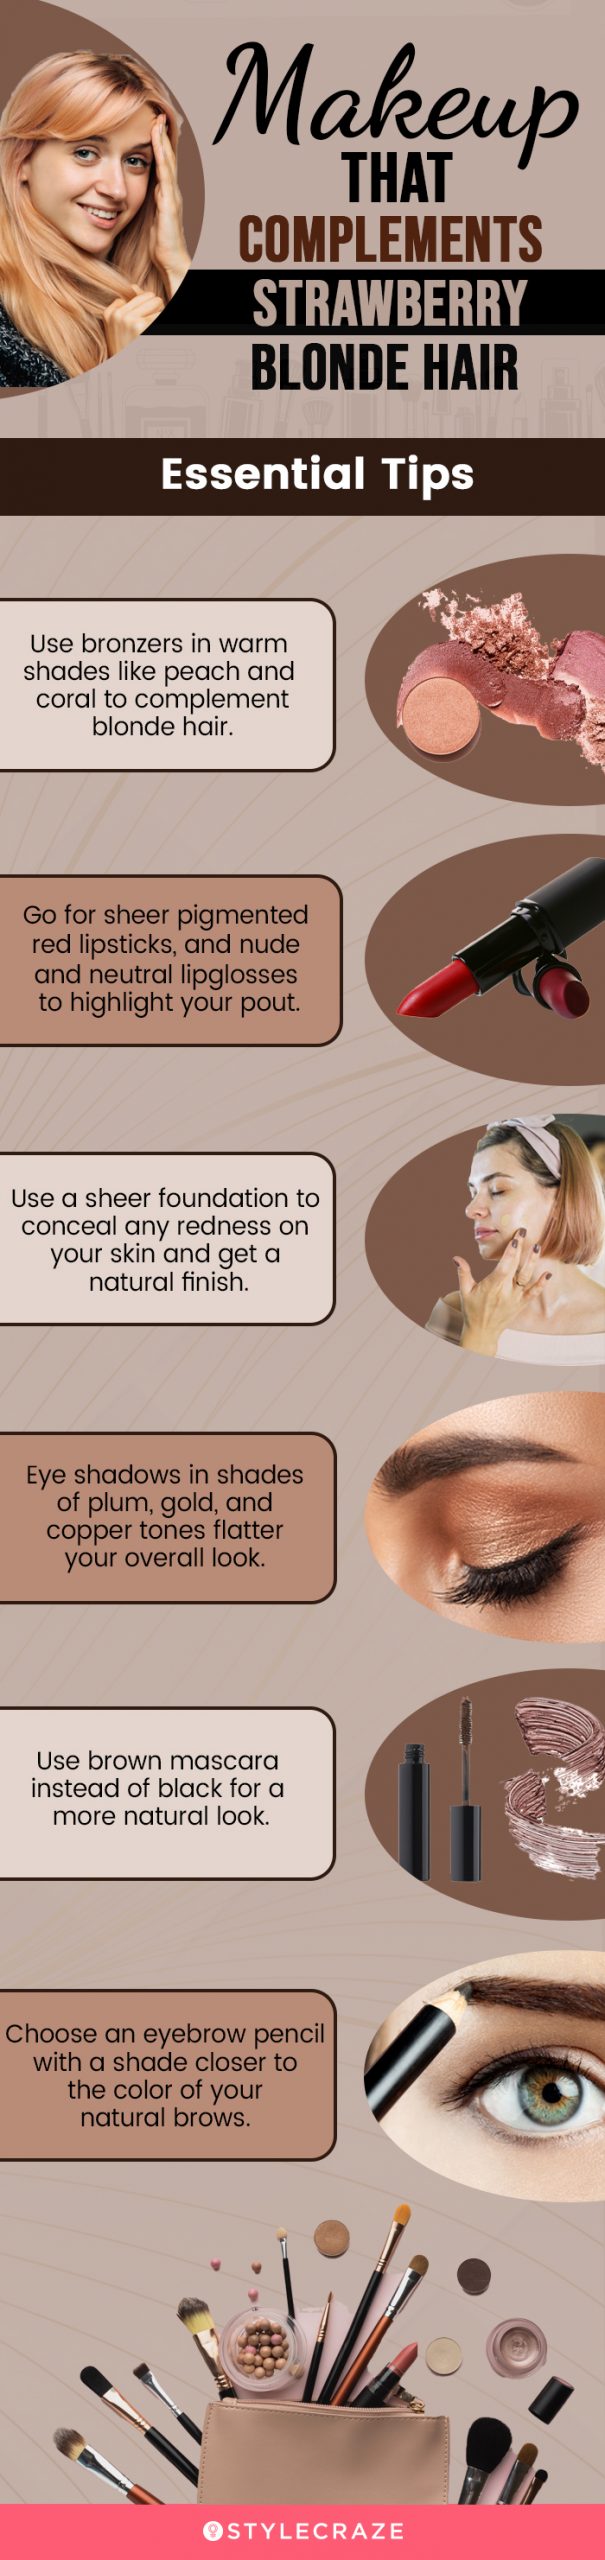 makeup that complements strawberry blonde hair (infographic)